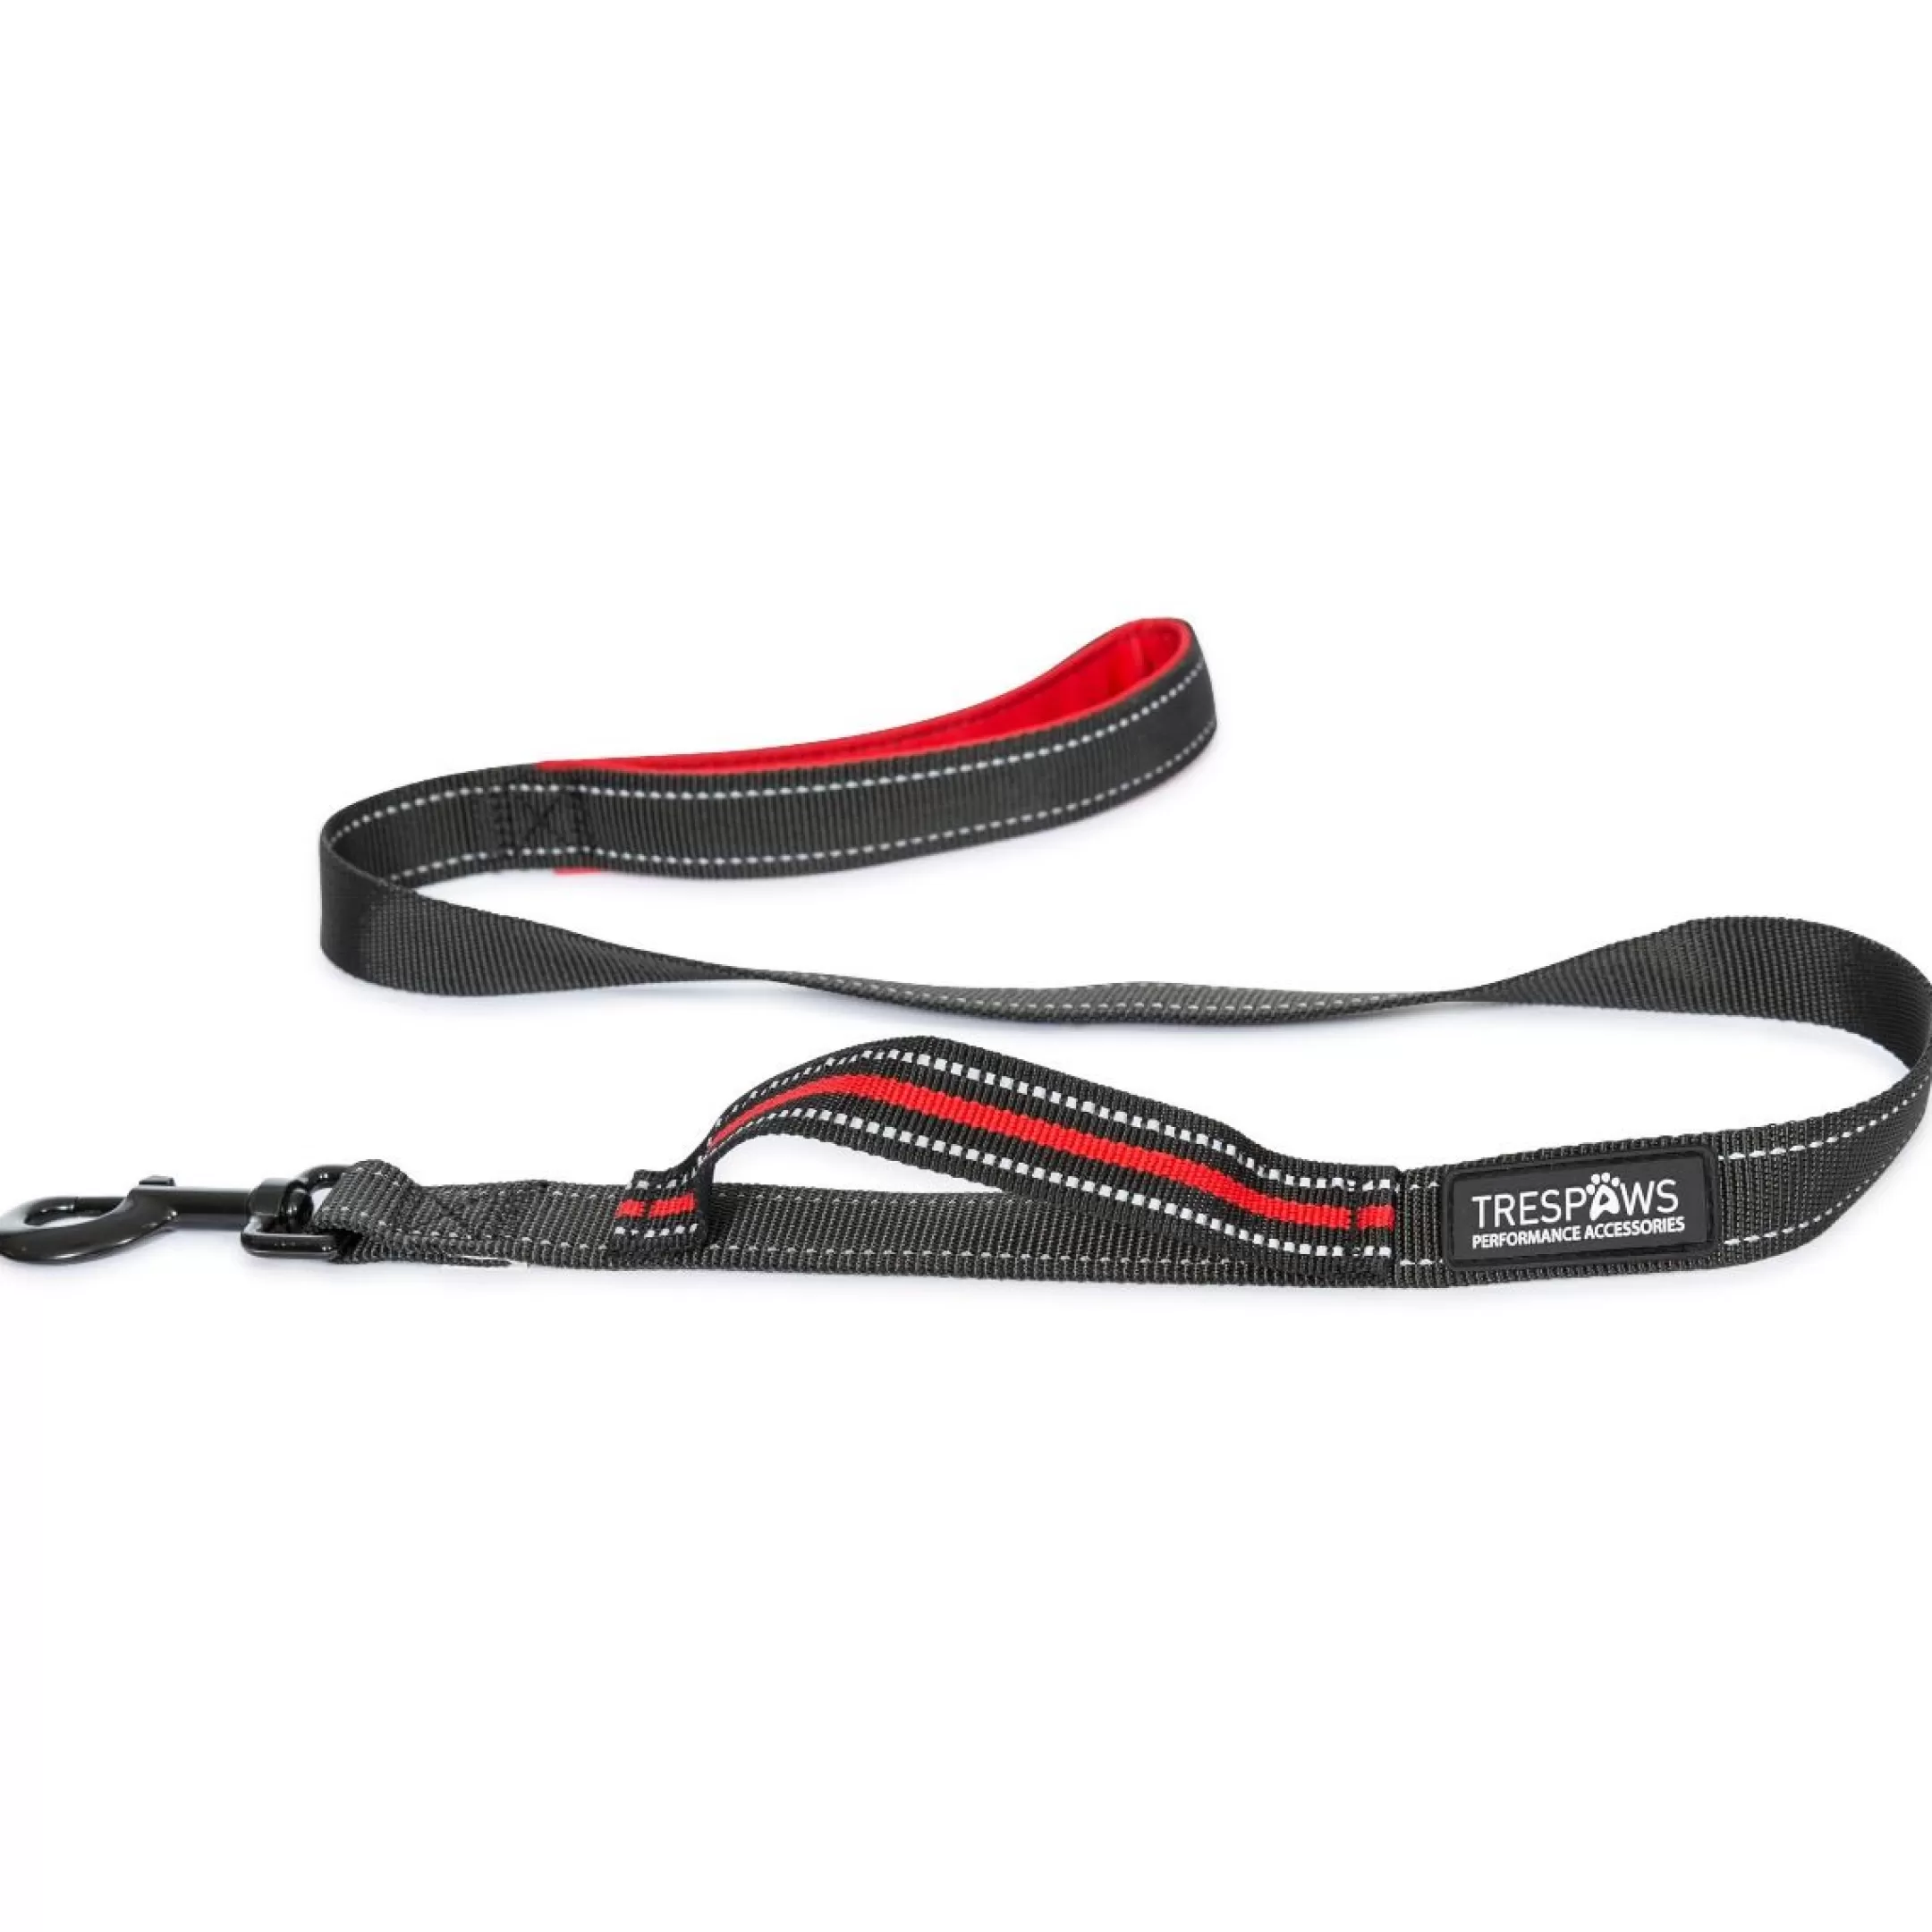 Trespaws Reflective Padded Dog Lead Buster | Trespass Outlet